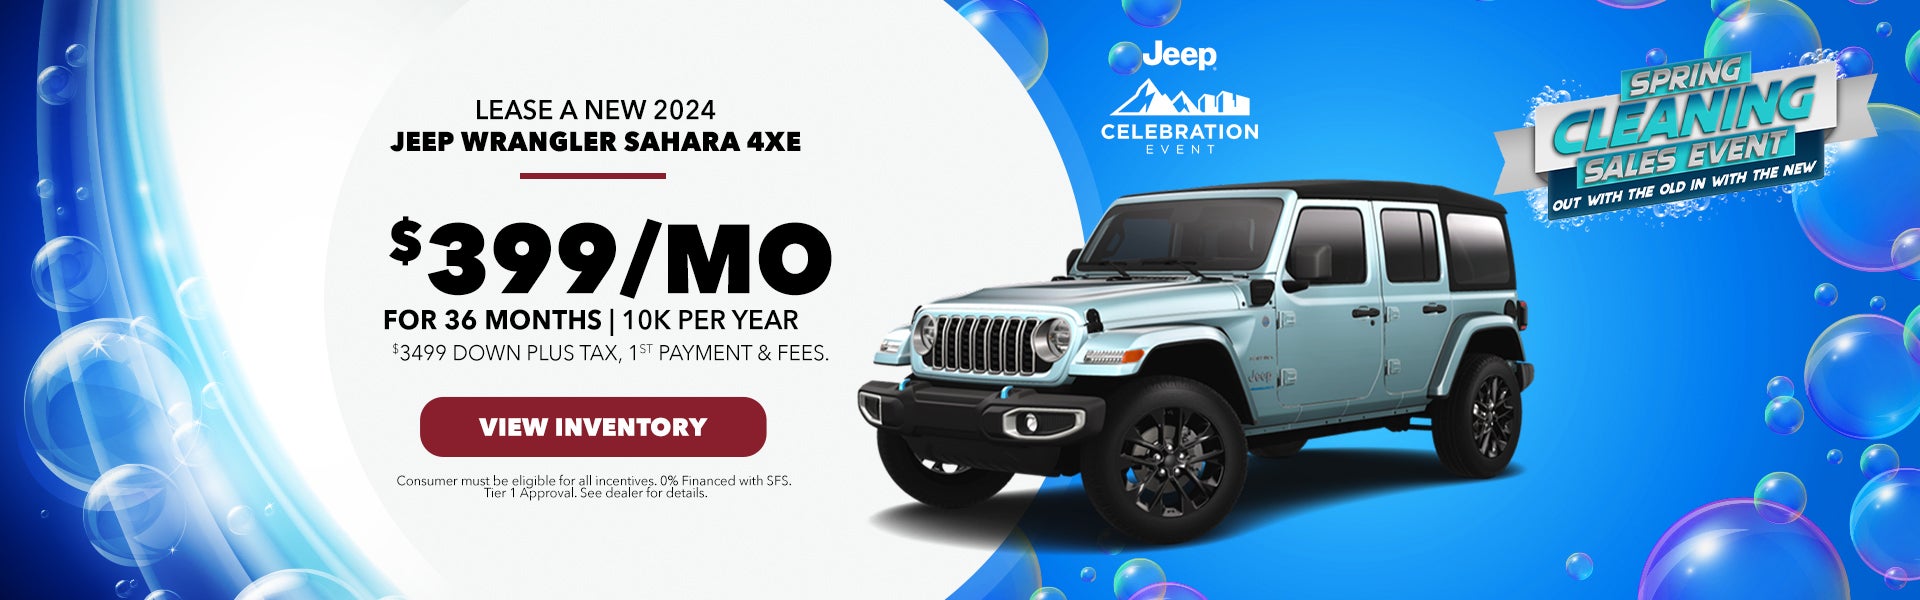 Lease a New 2024 Jeep Wrangler Sahara 4xe $399 for 36 Month